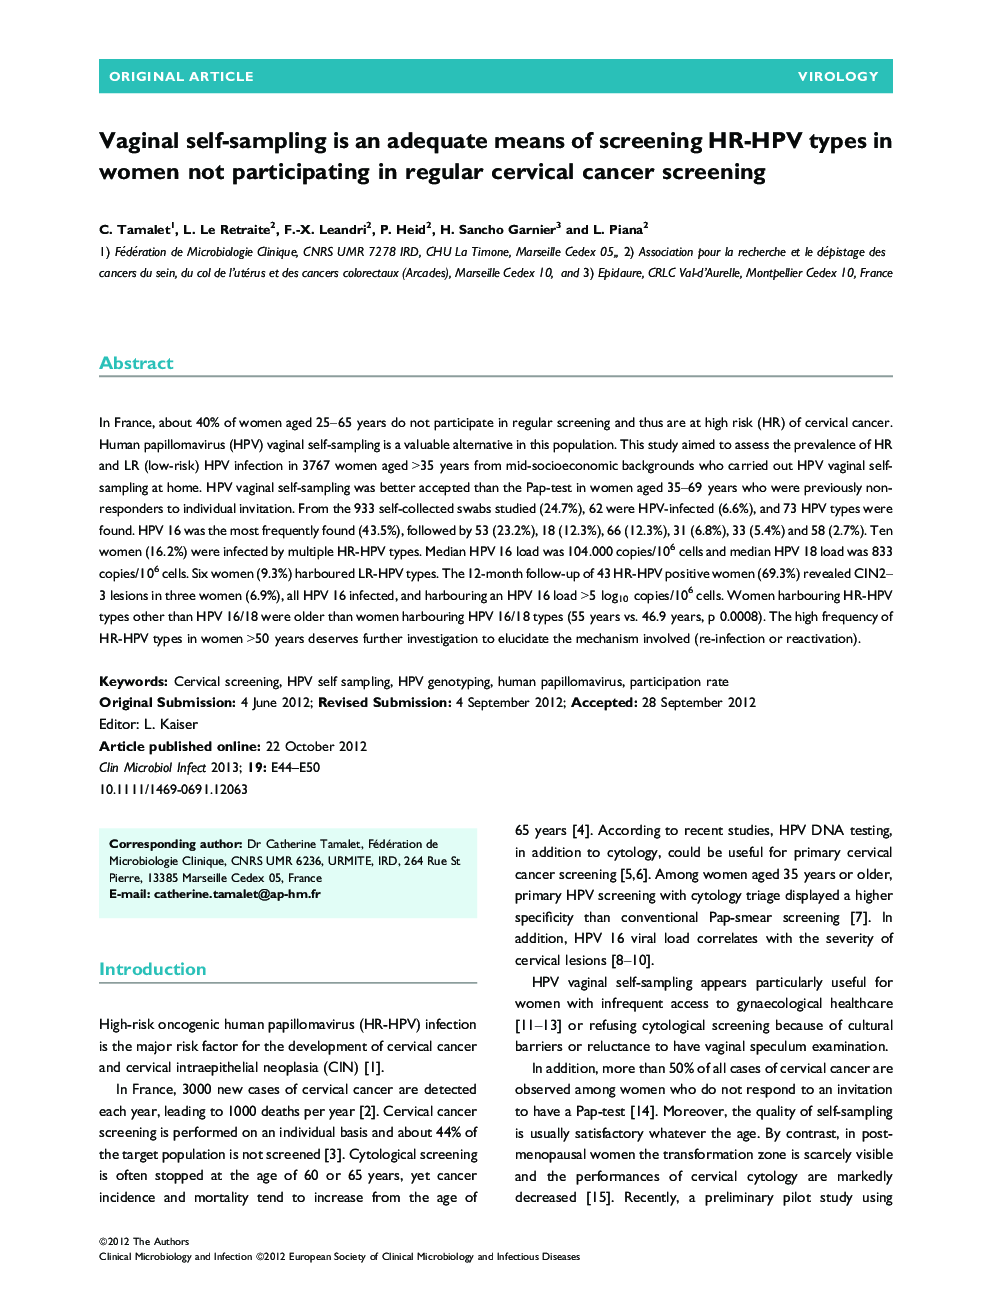 Vaginal self-sampling is an adequate means of screening HR-HPV types in women not participating in regular cervical cancer screening